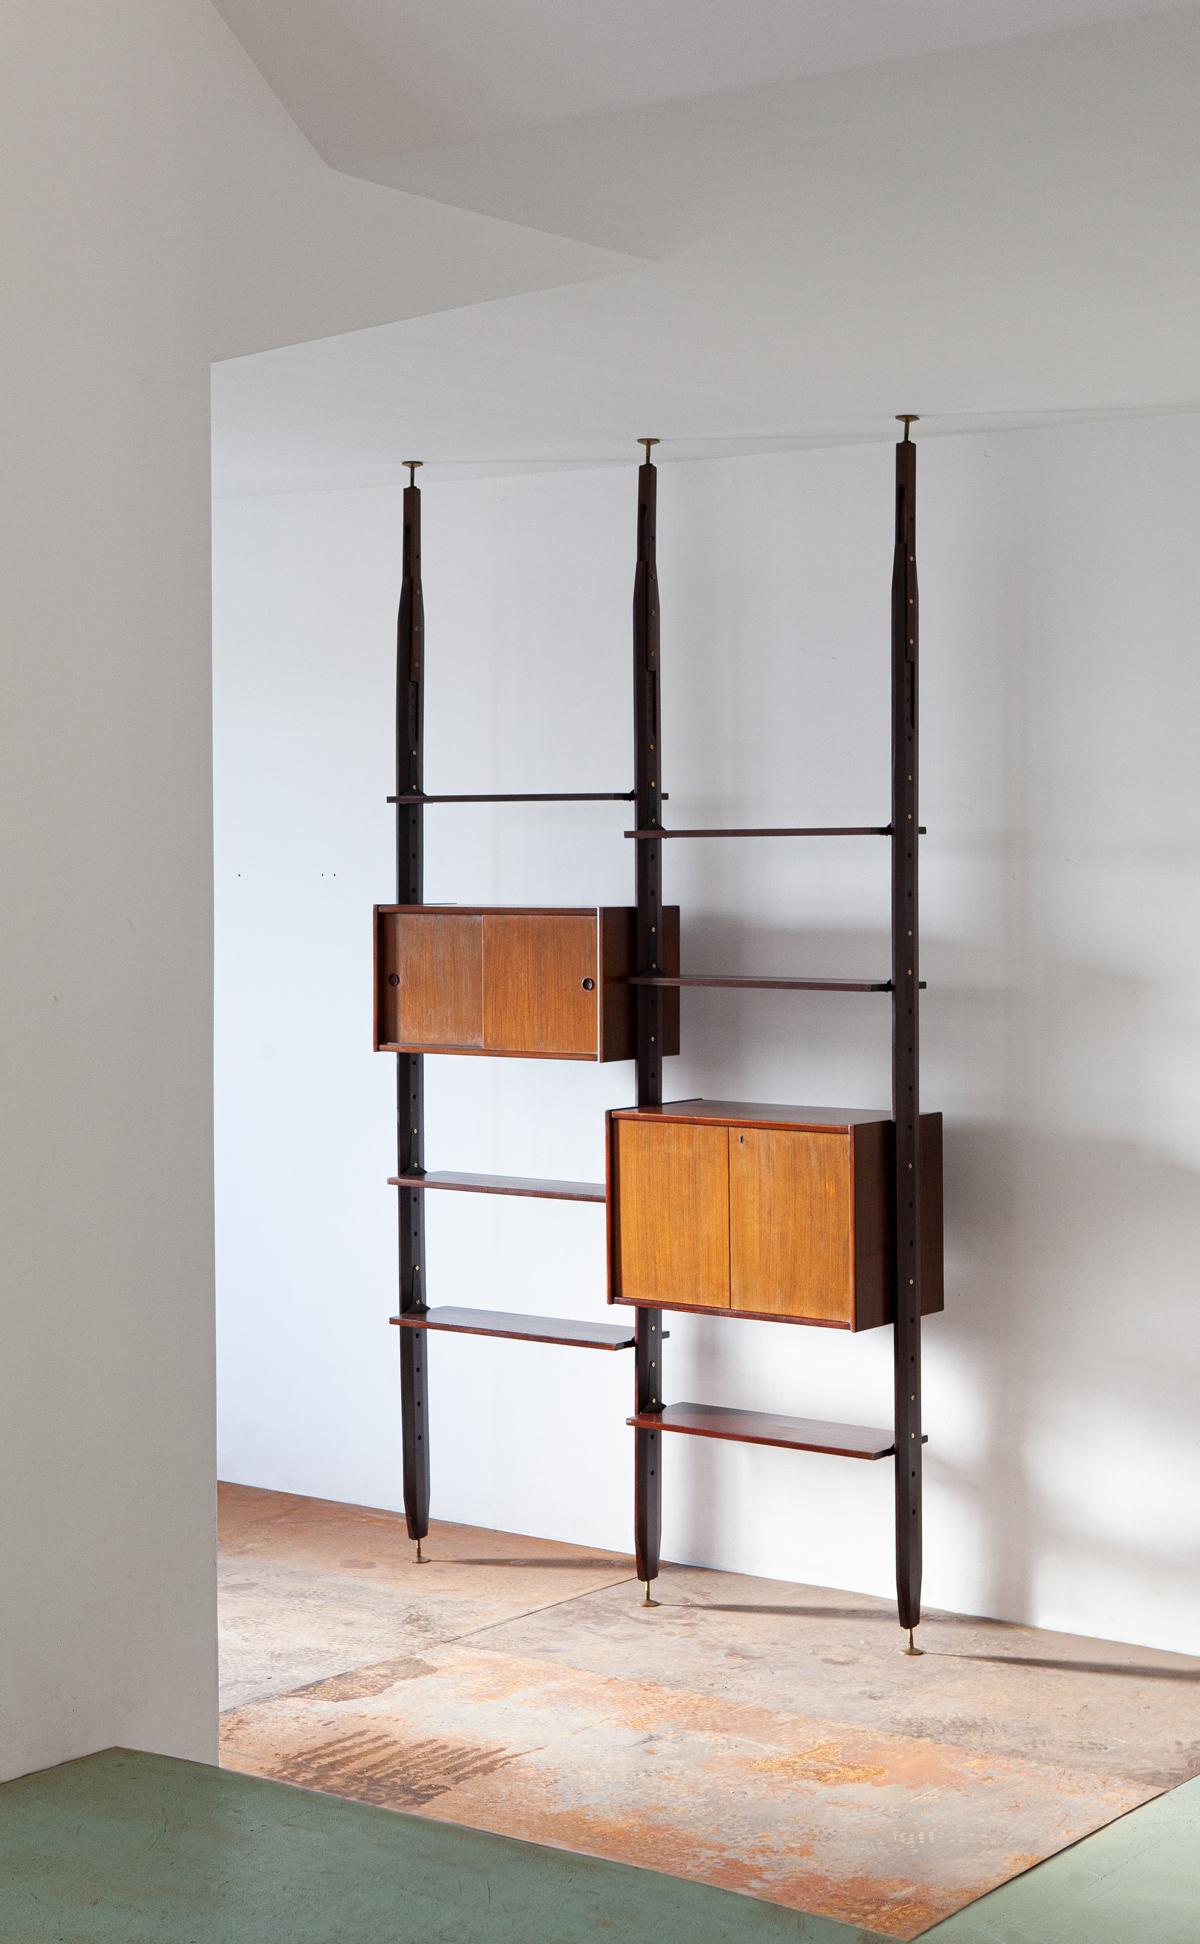 1950s Italian floor to ceiling wall unit

This modern design bookshelf is full of technical details and workmanship typical of high-level Italian manufacturing of the midcentury.
Can also be used as a room divider, as the back is well finished as